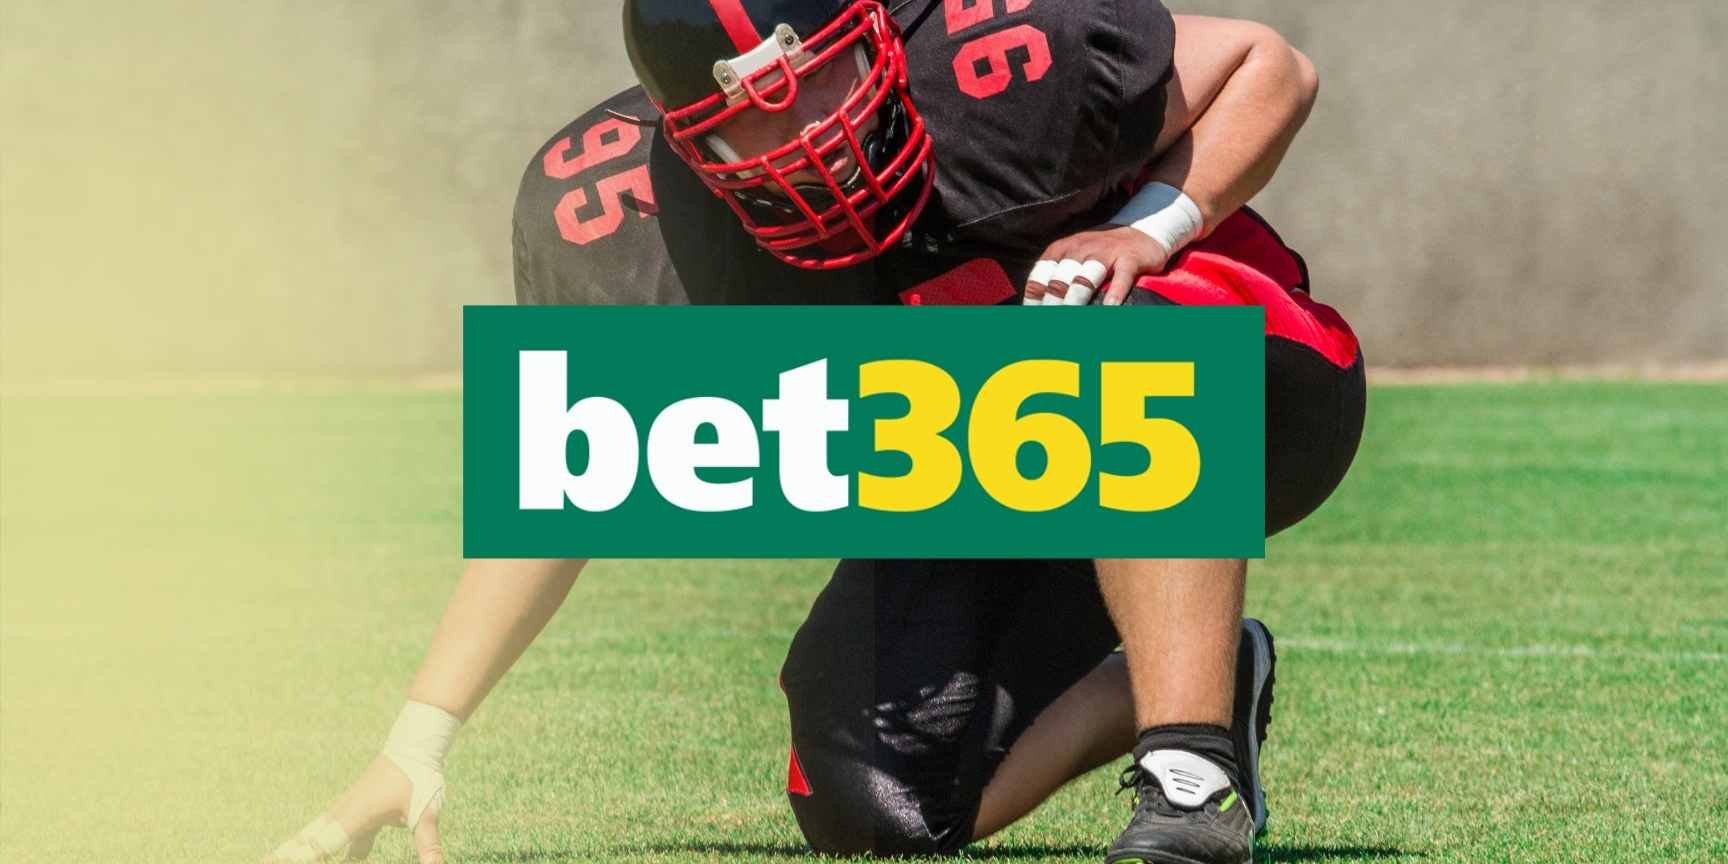 What are the main benefits of betting with Bet365?